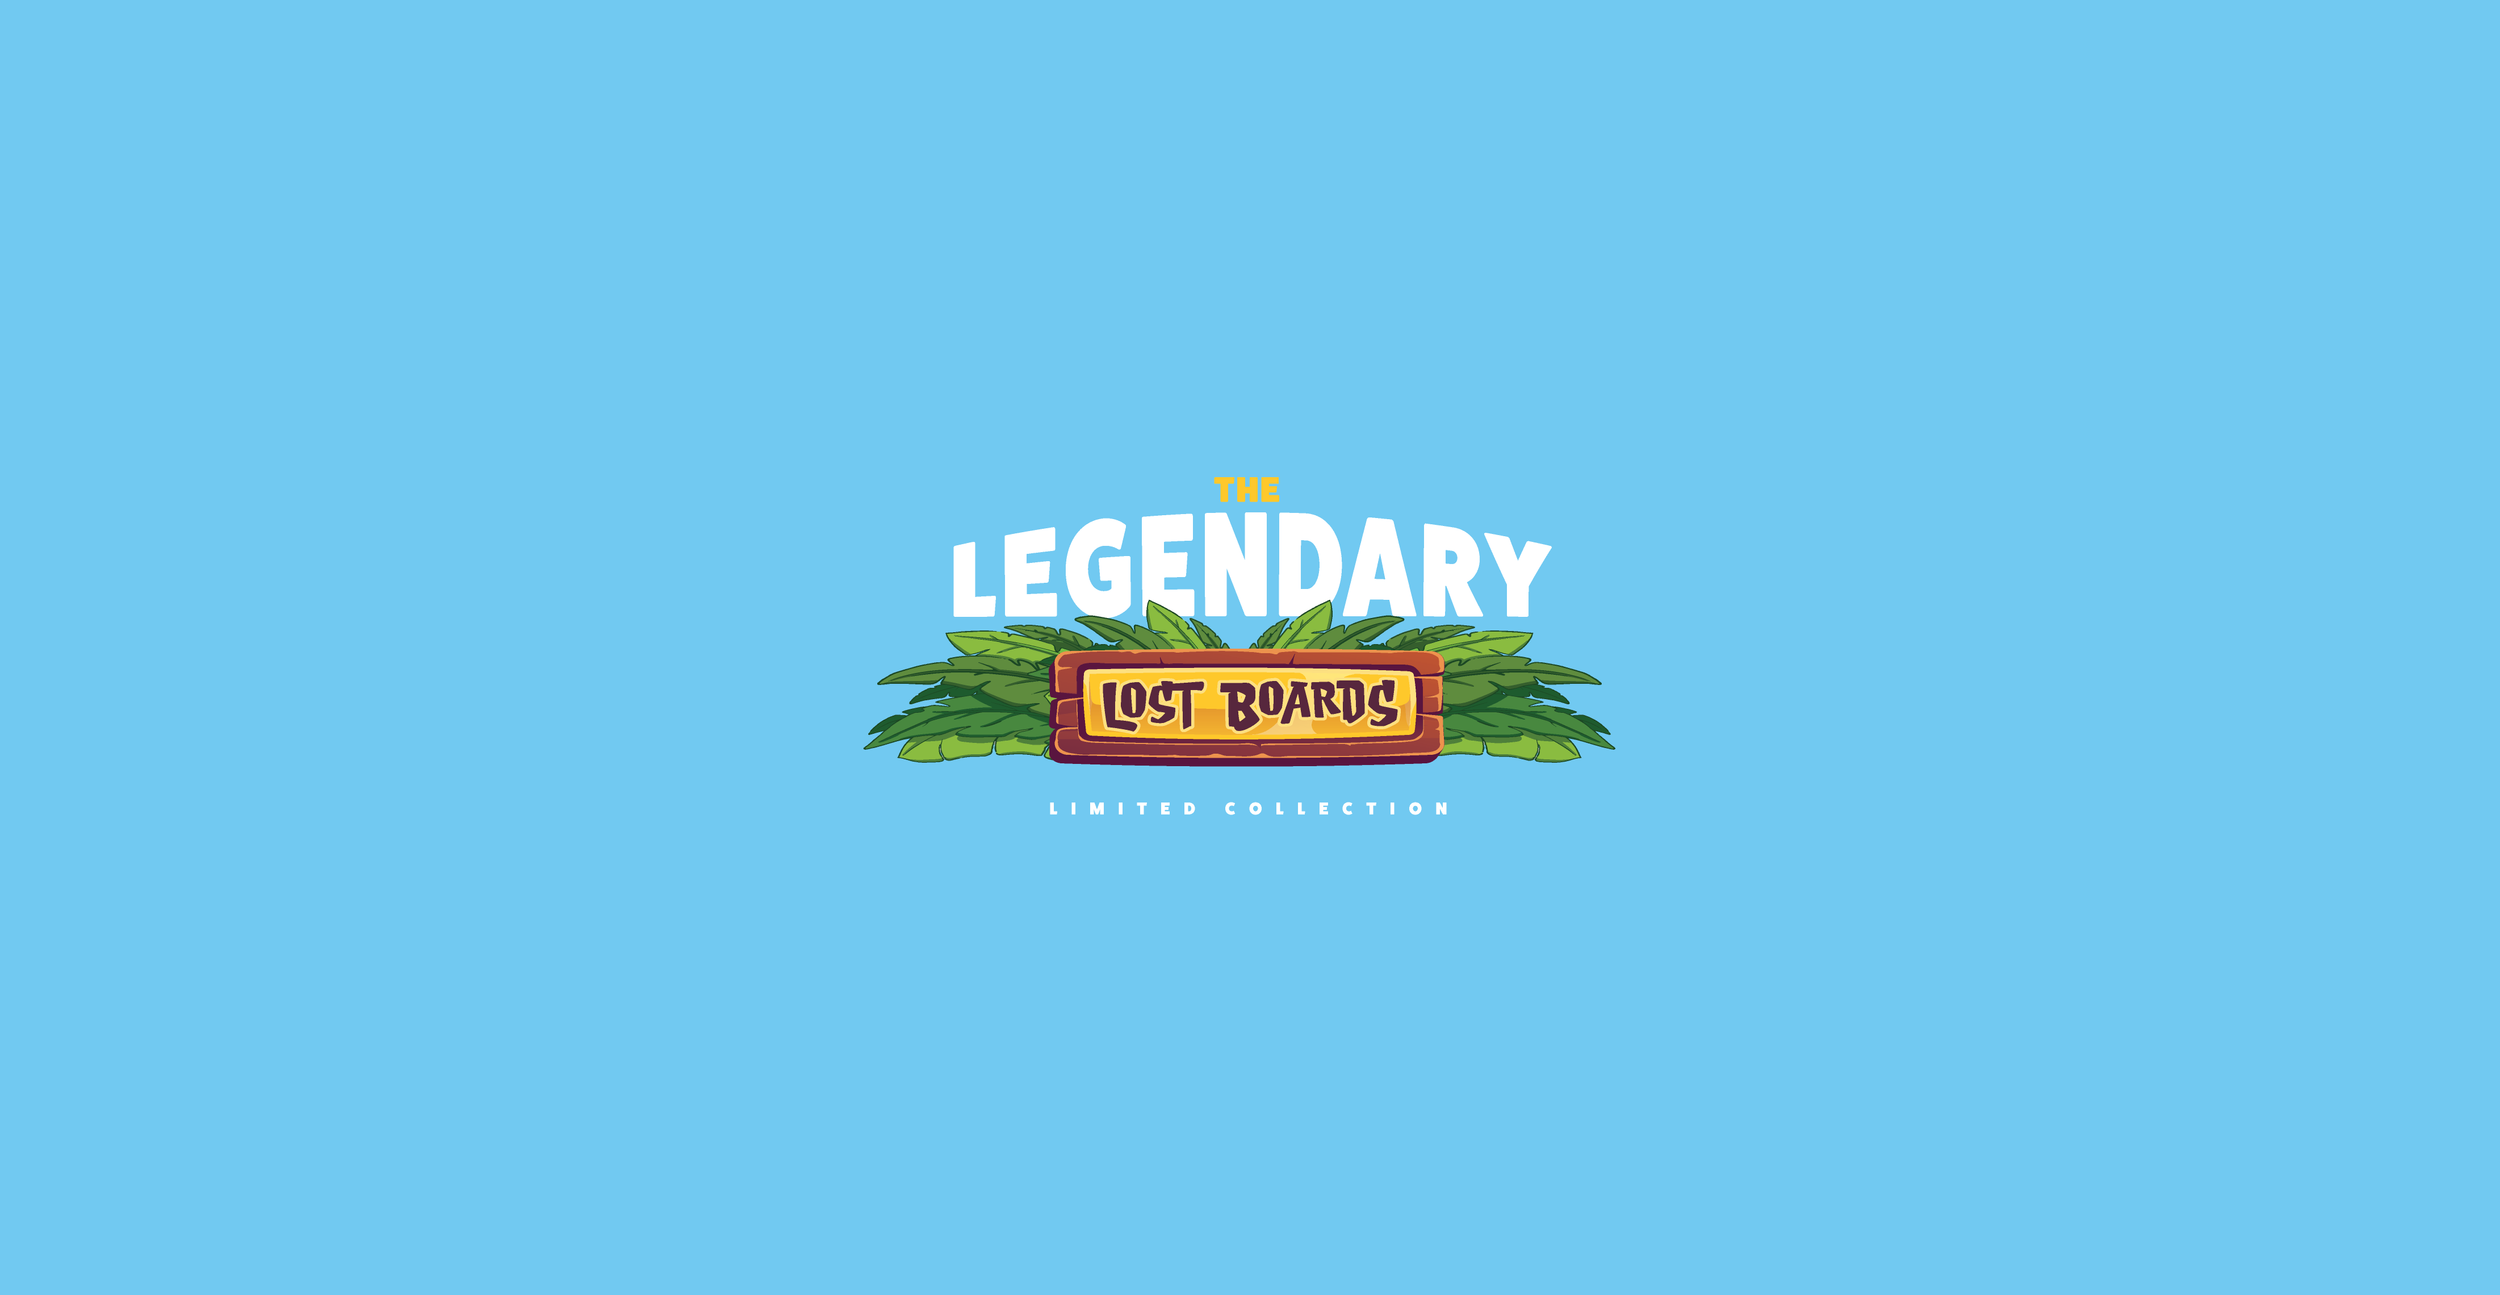 Legendary-Lost-Boards-WEB-Bannerv2.png